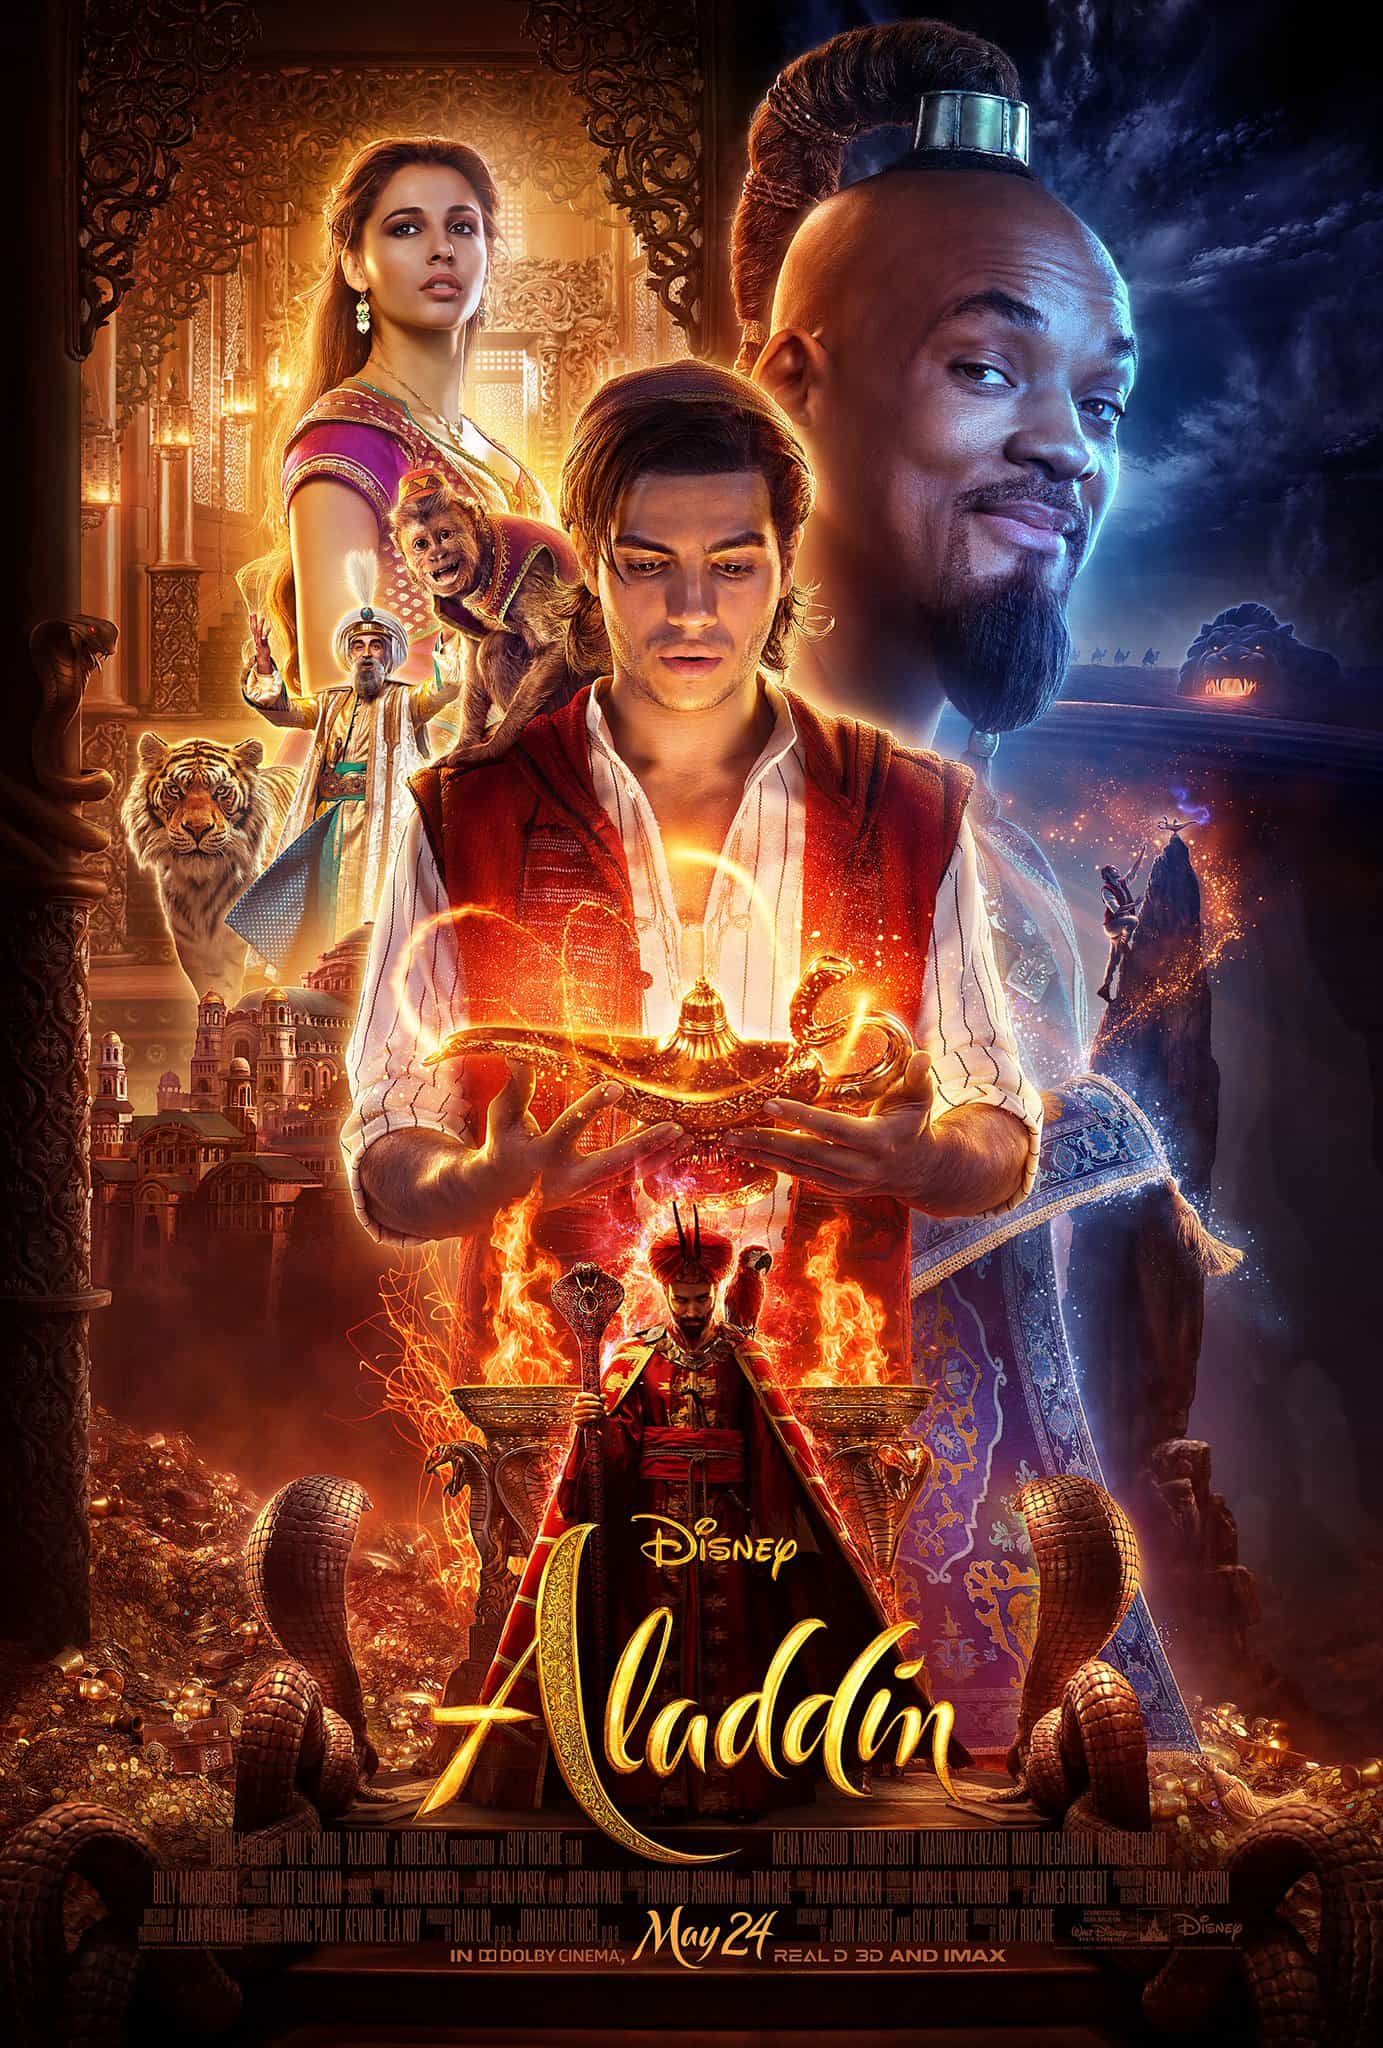 First look at the live action Aladdin from Disney